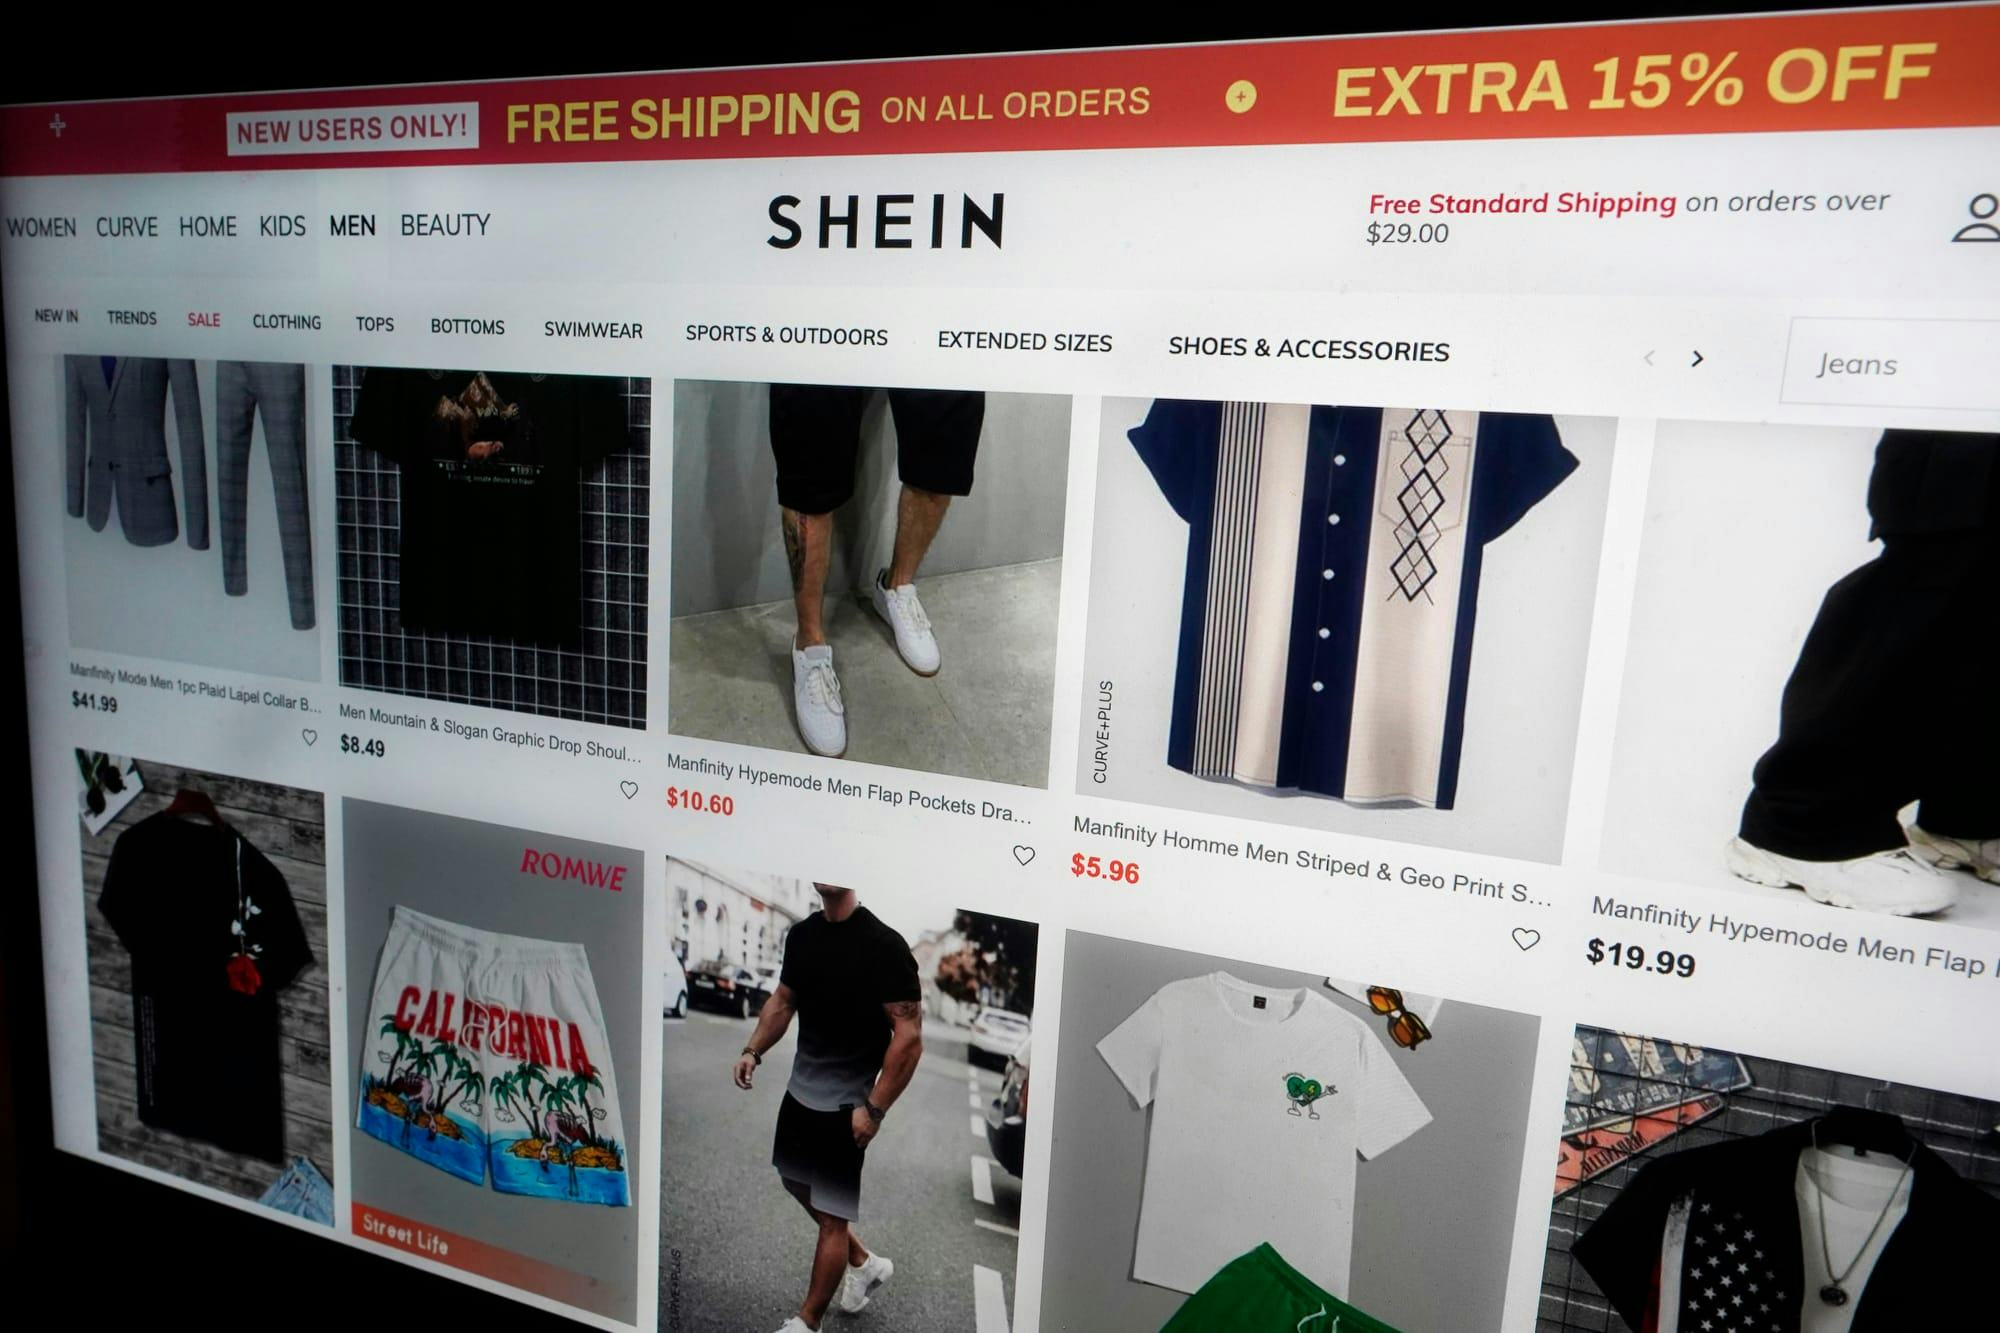 A page from Shein's website featuring various men's clothing items.